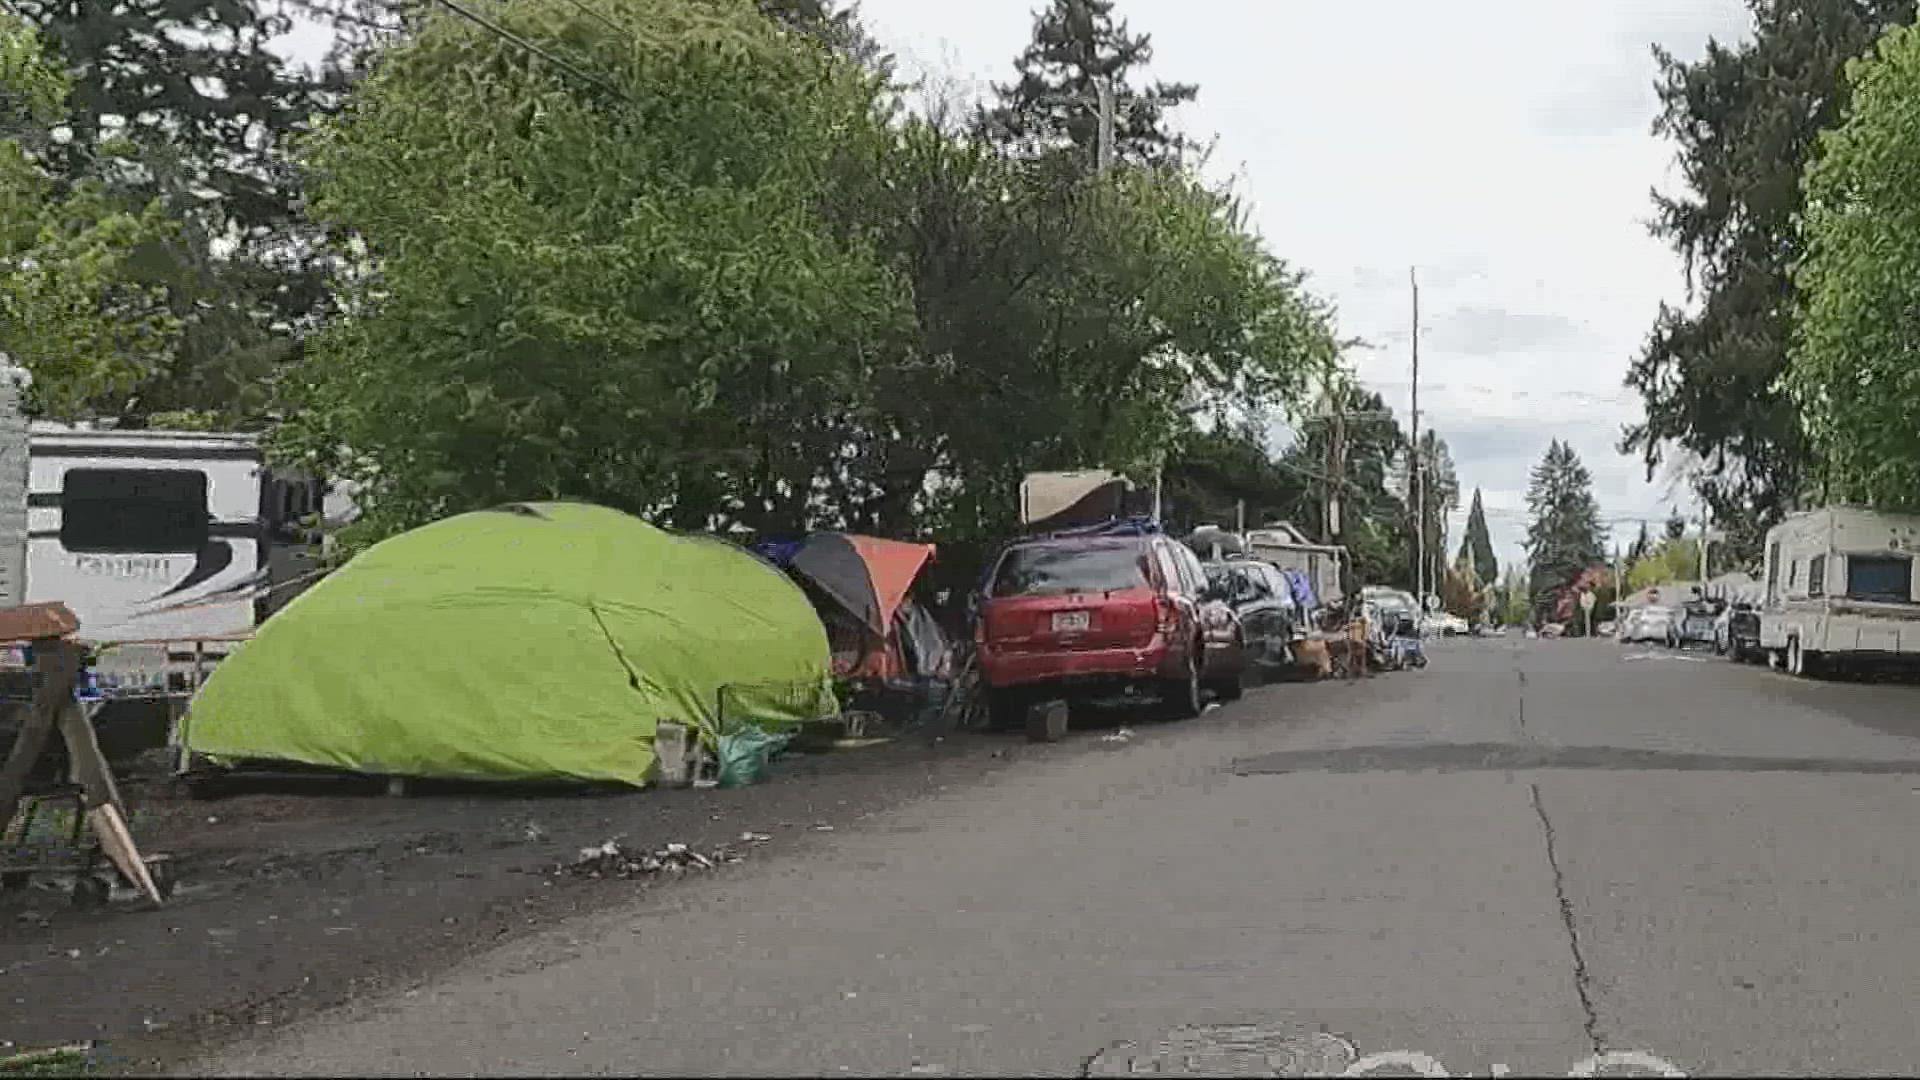 Tenants say campers are aggressive, crime has increased and they no longer feel safe living there.